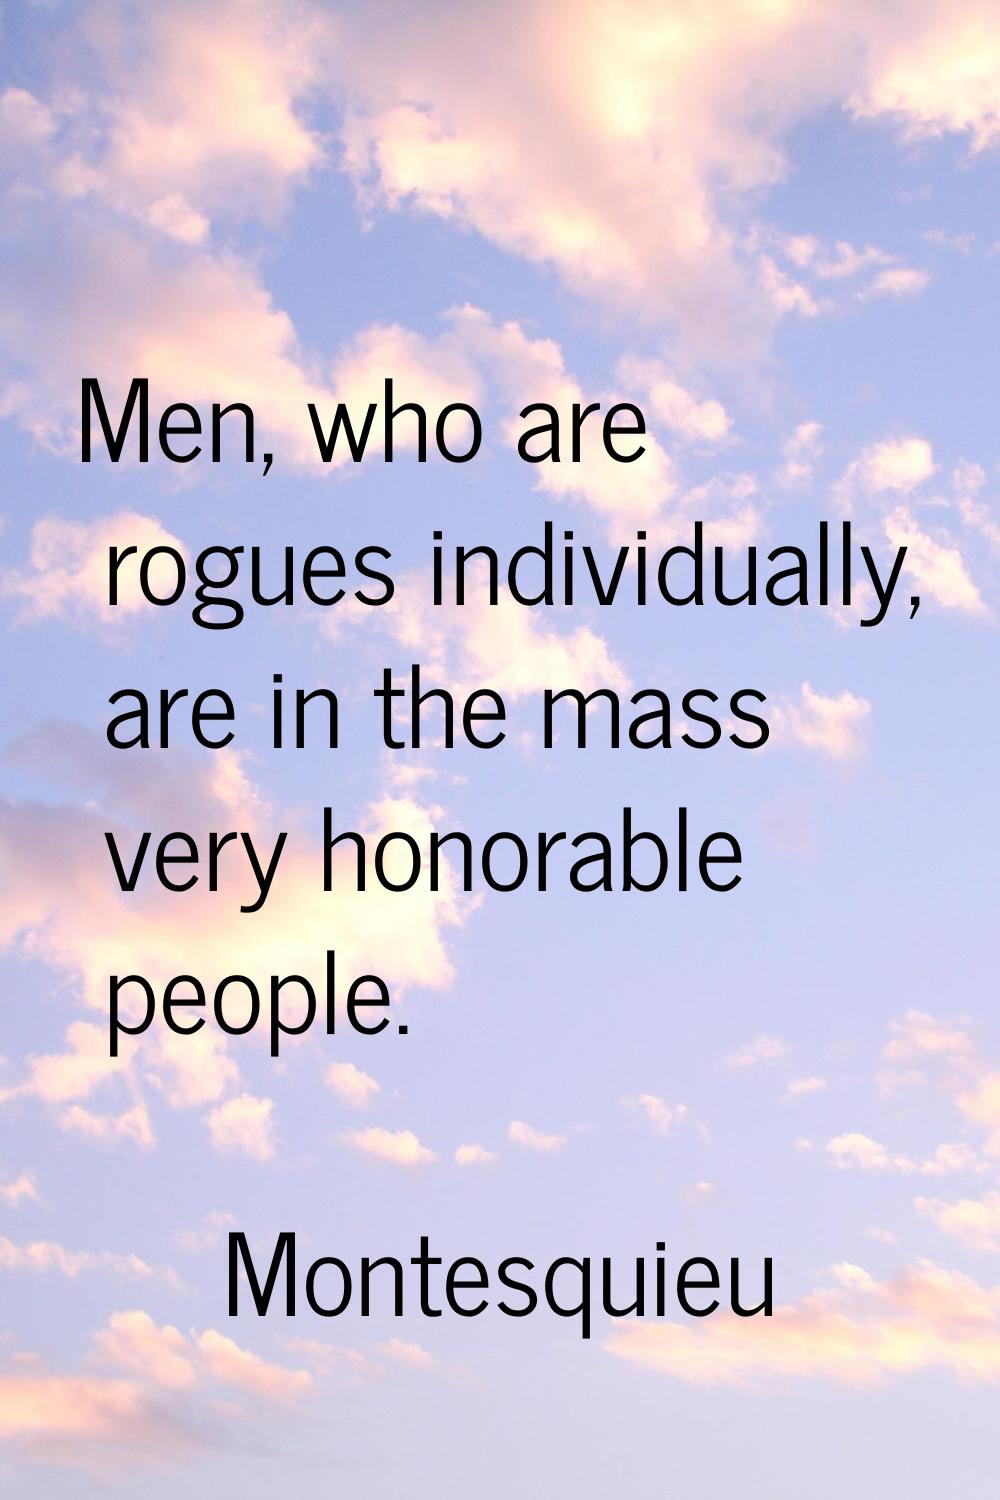 Men, who are rogues individually, are in the mass very honorable people.